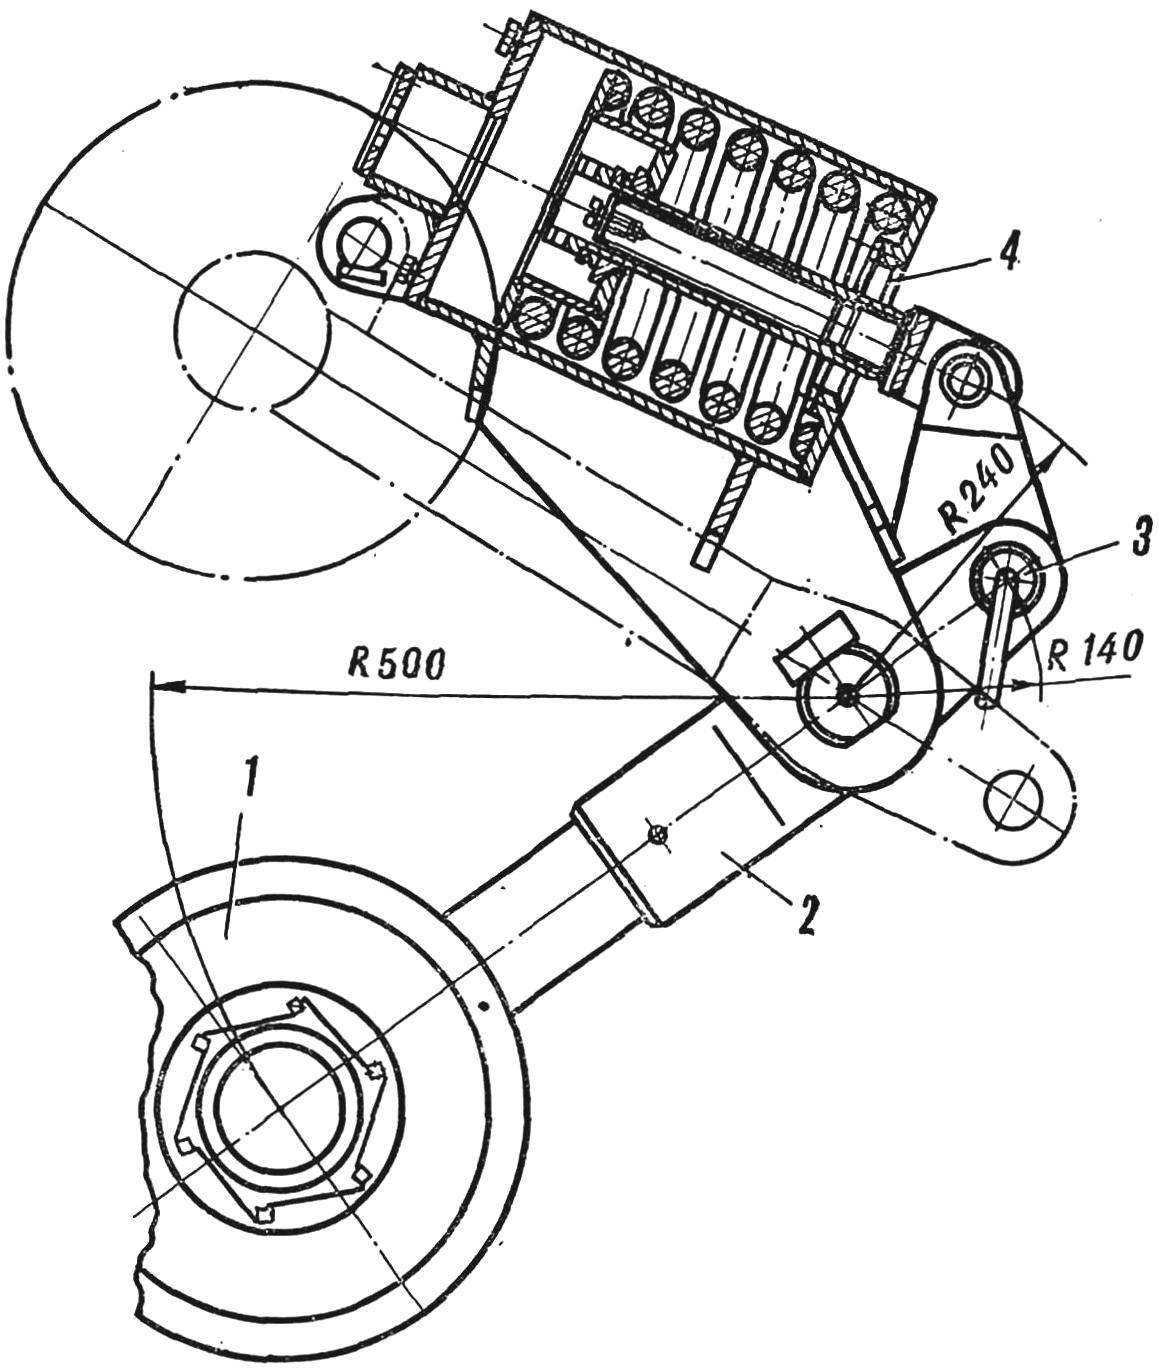 Fig. 3. The front guide rollers ZIL-130